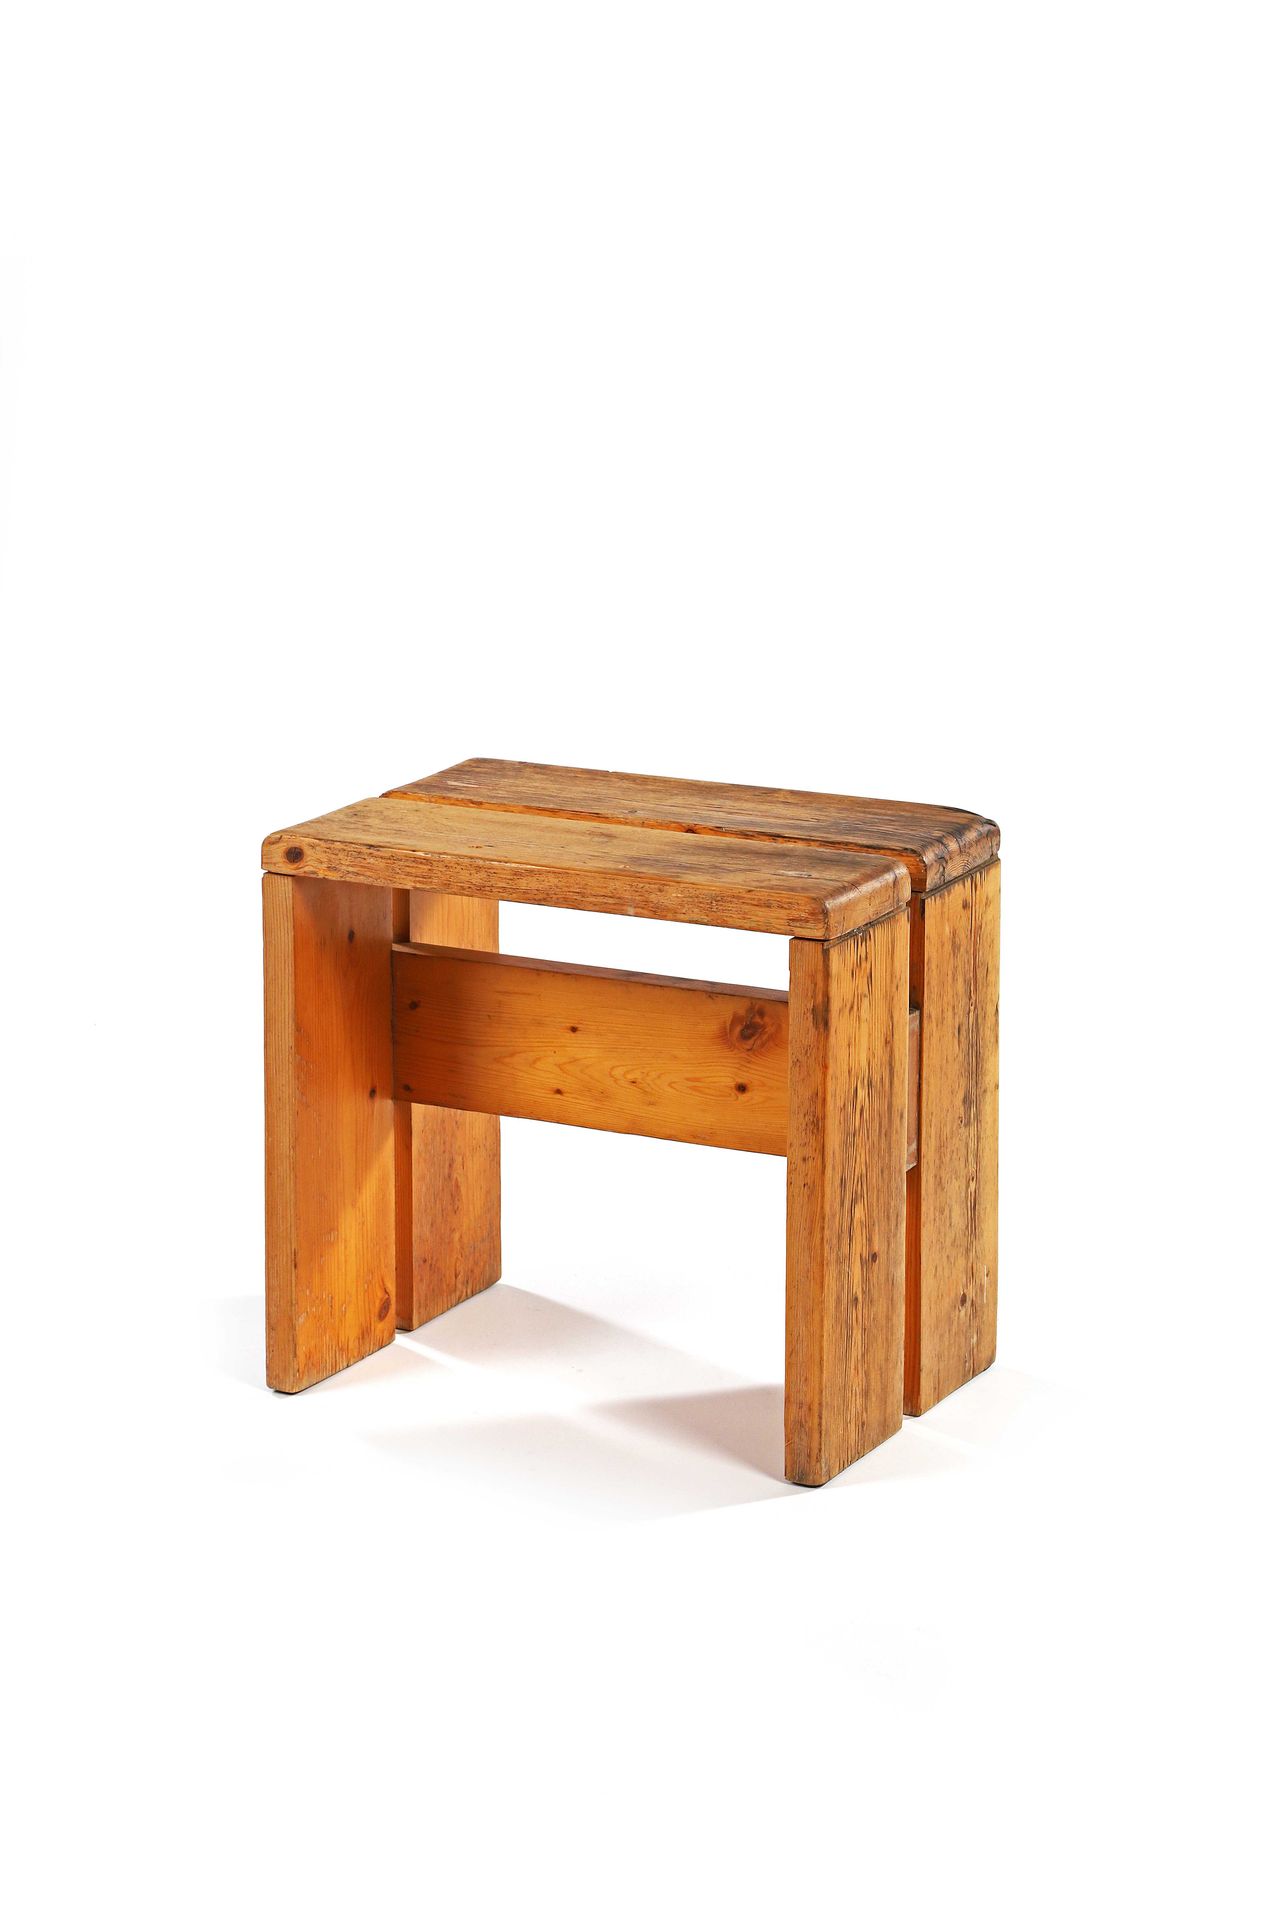 Null Charlotte PERRIAND

(1903-1999)

Tabouret

Pin

42 x 45 x 31 cm.

Circa 196&hellip;